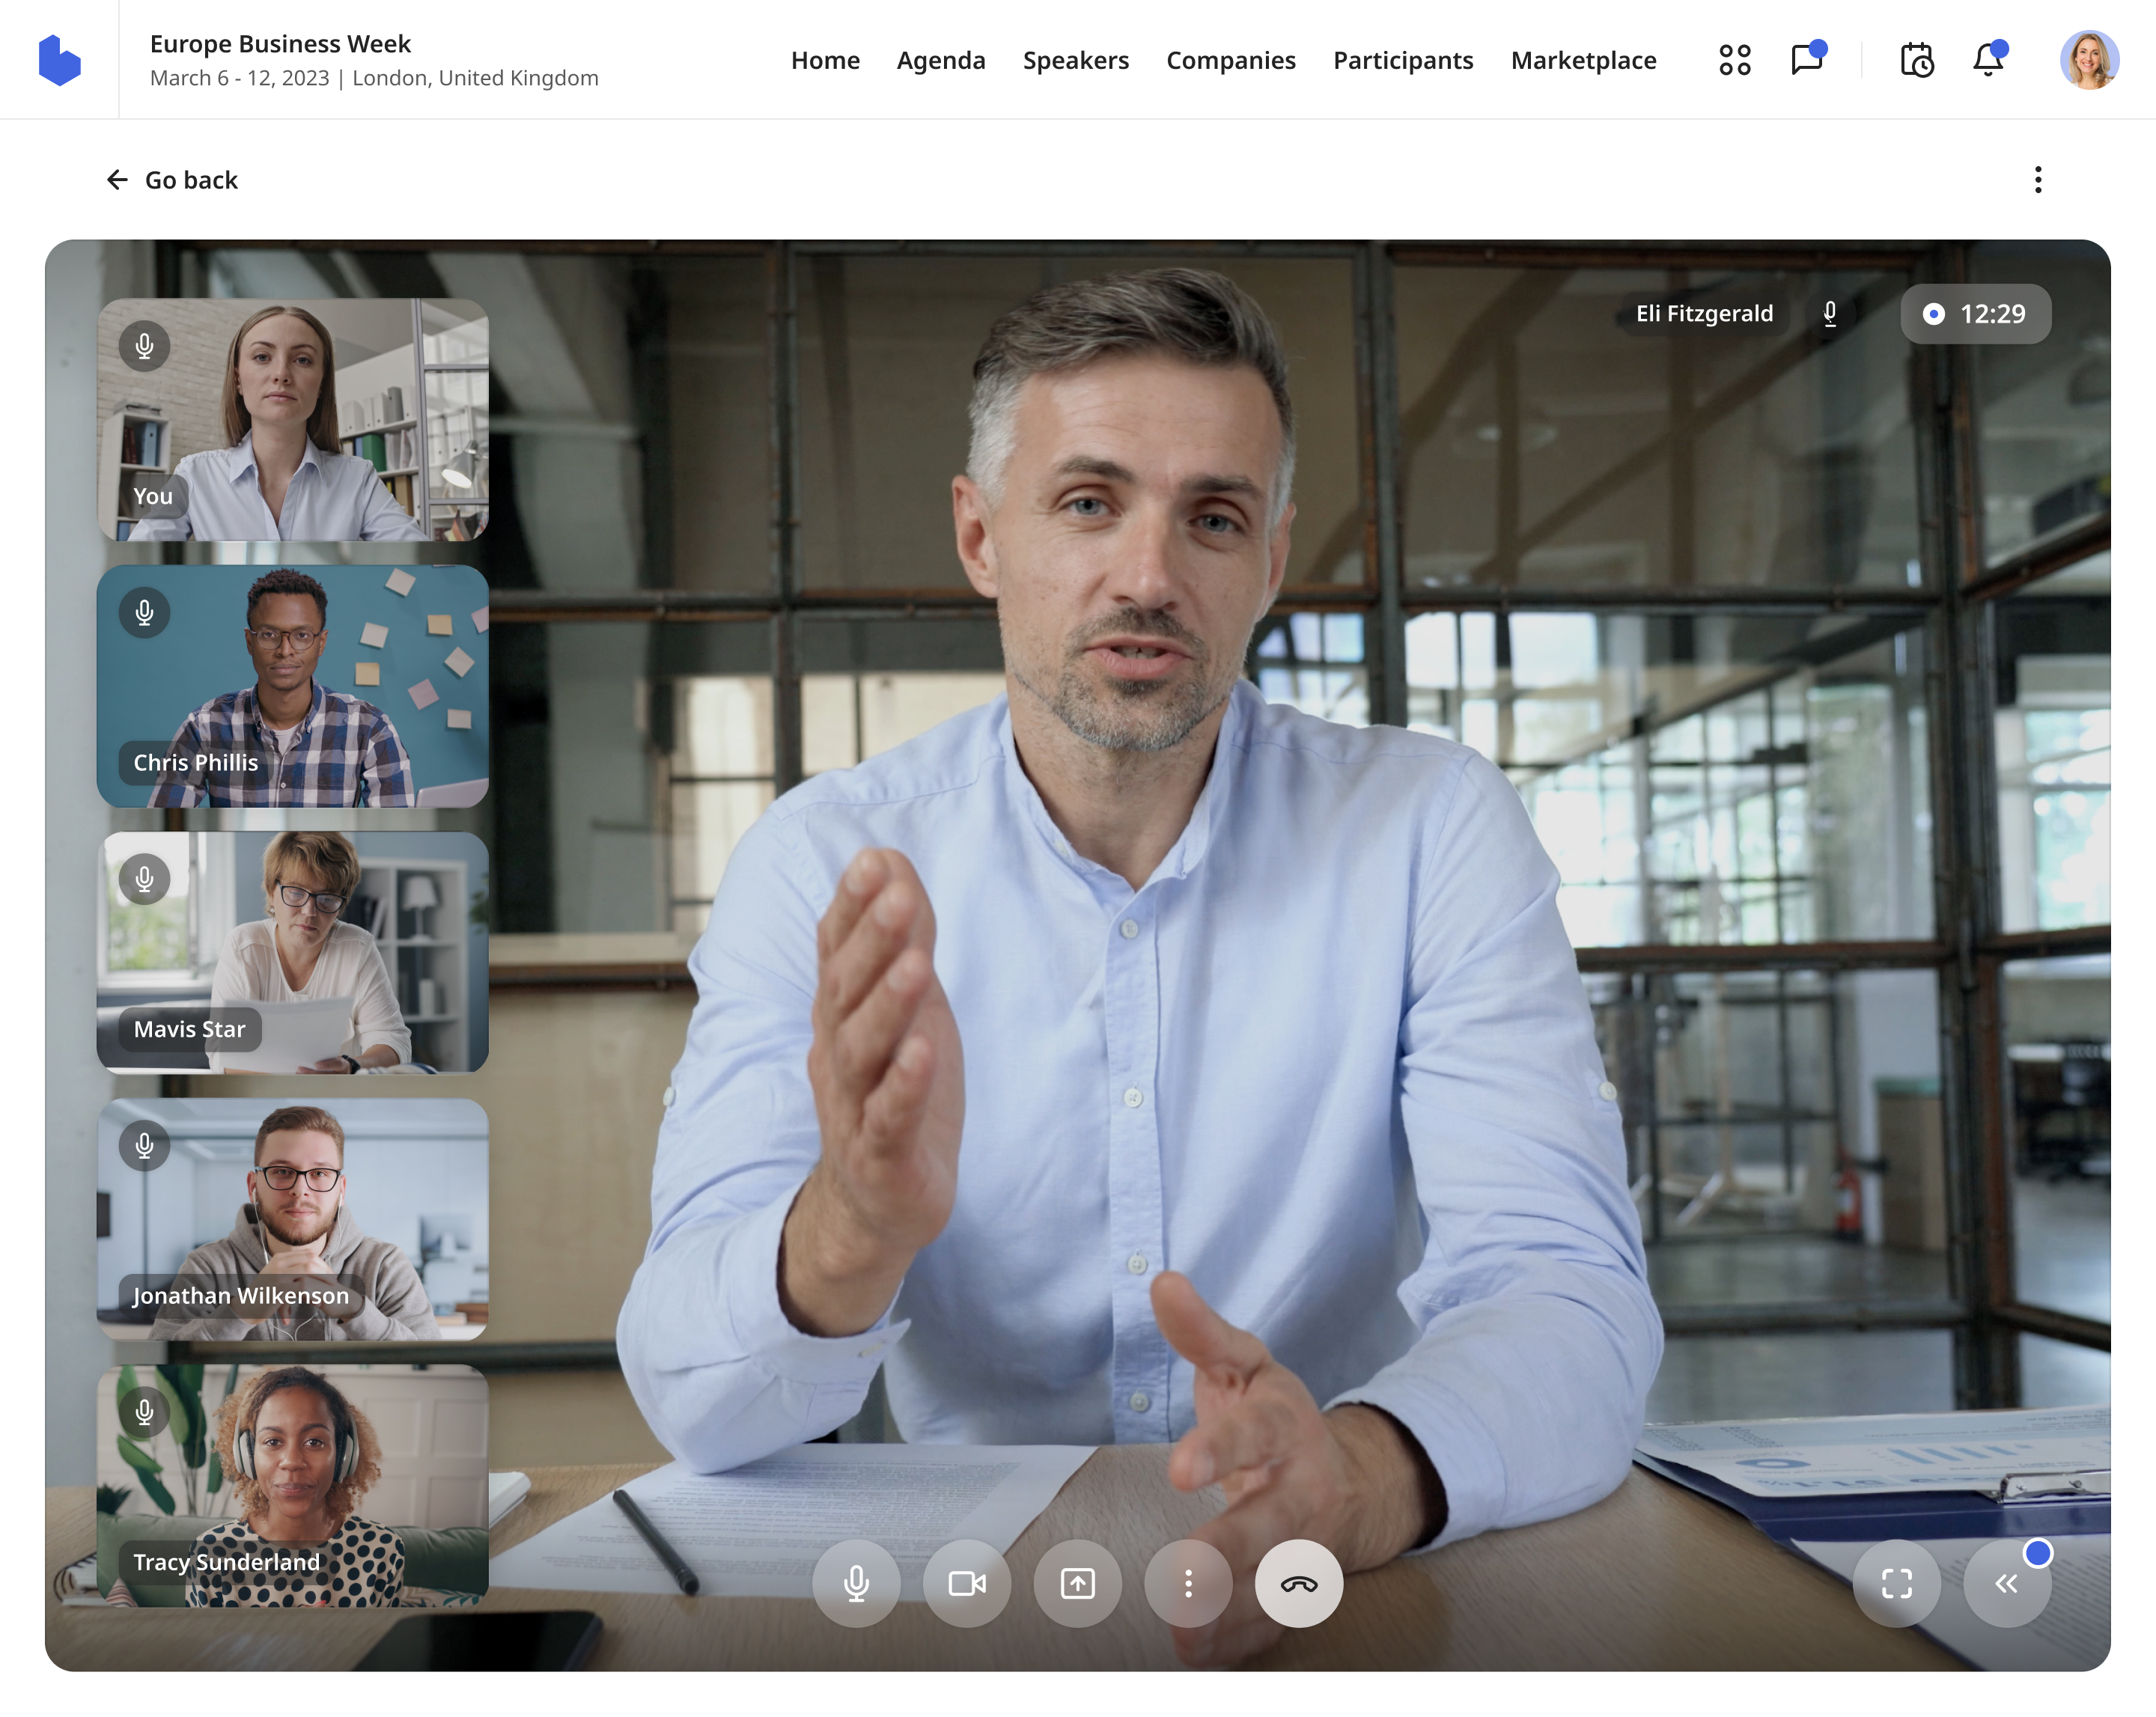 Seamless teamwork for successful collaboration. Add more reps to online meetings for easier b2b collaboration. No downloads required! Integrated video conferencing ensures excellent meeting quality.